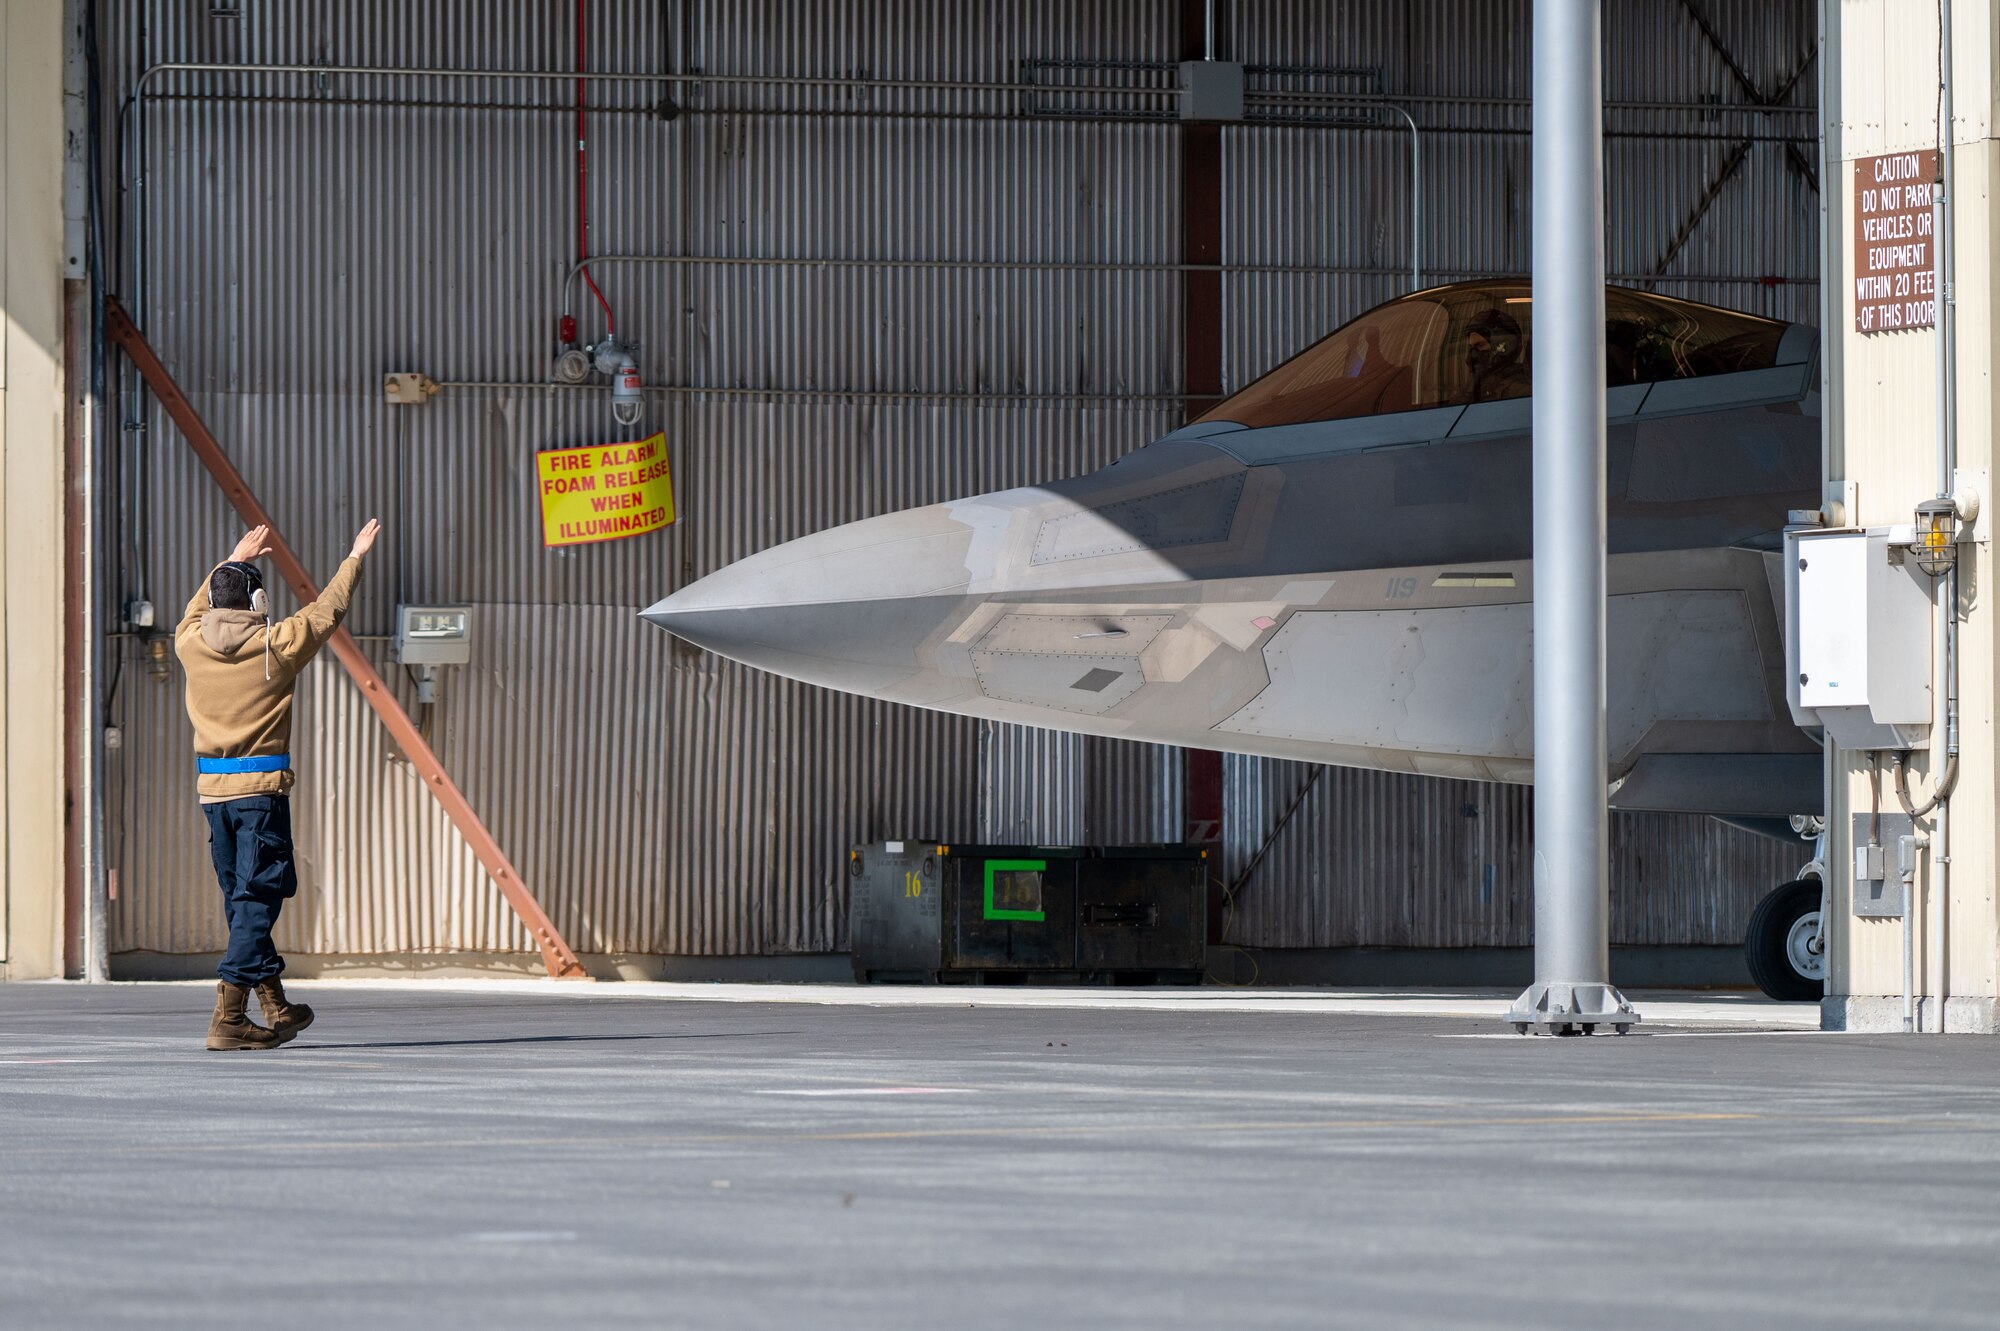 A photo of a crew chief marshaling an F-22 Raptor out of its hangar.